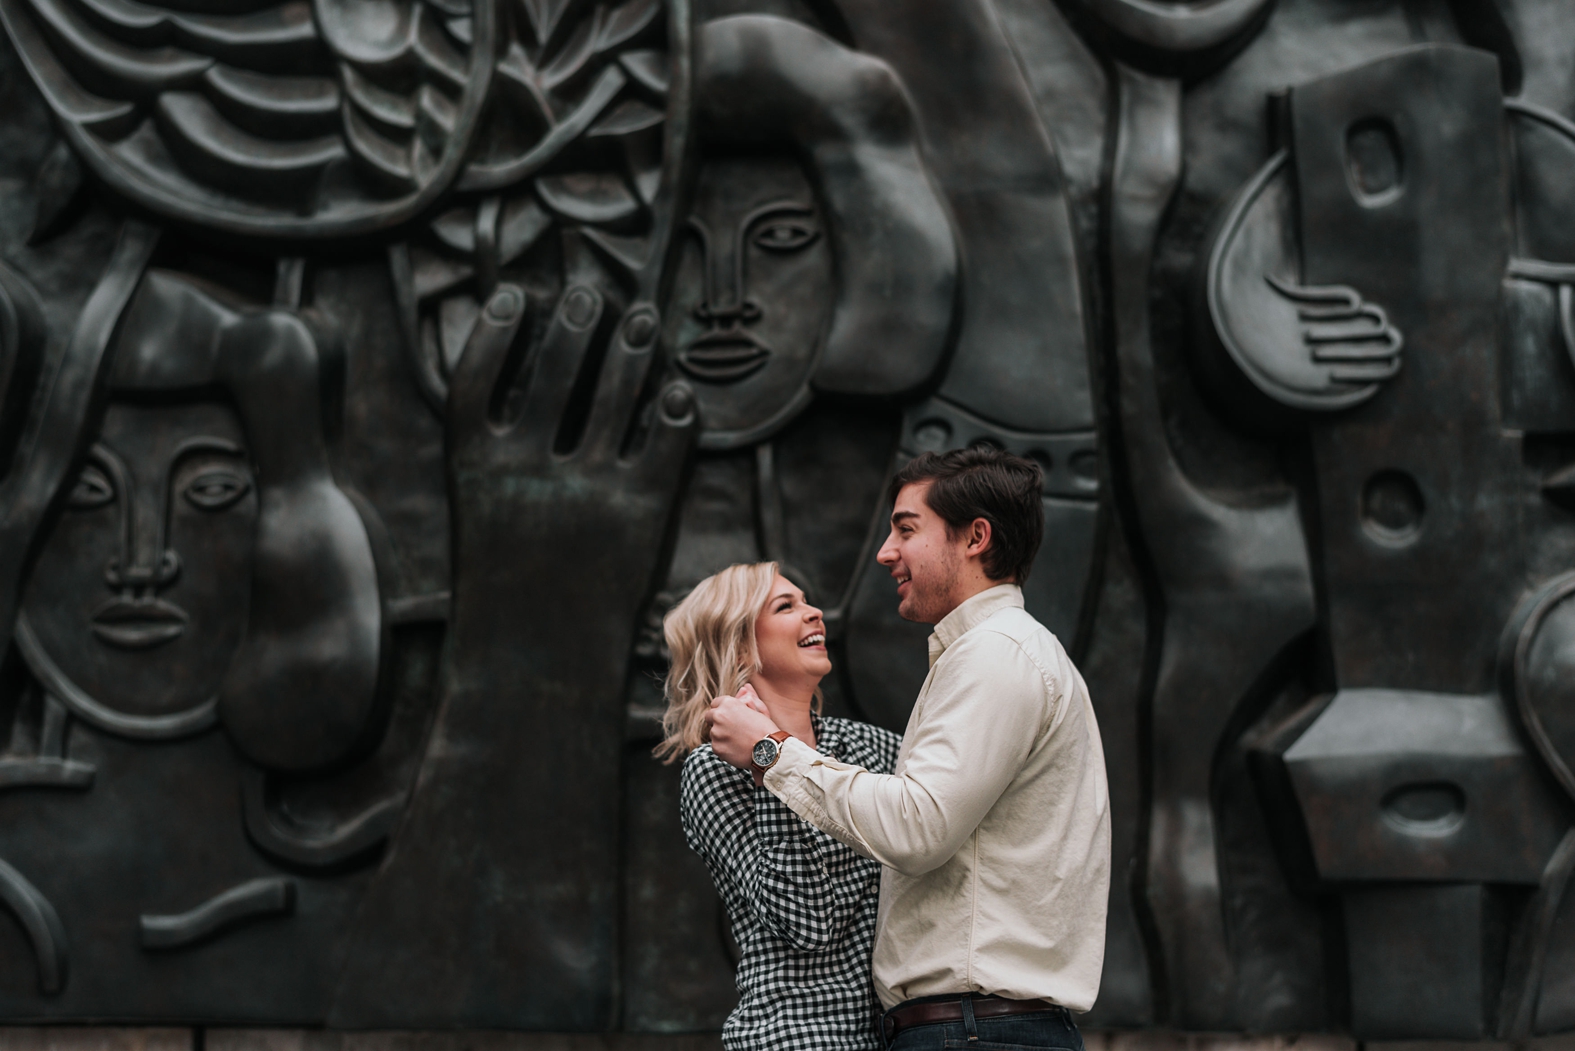 Bride and groom to be dance and laugh in front of black sculpture wall in downtown St. Louis during their winter engagement photo shoot.